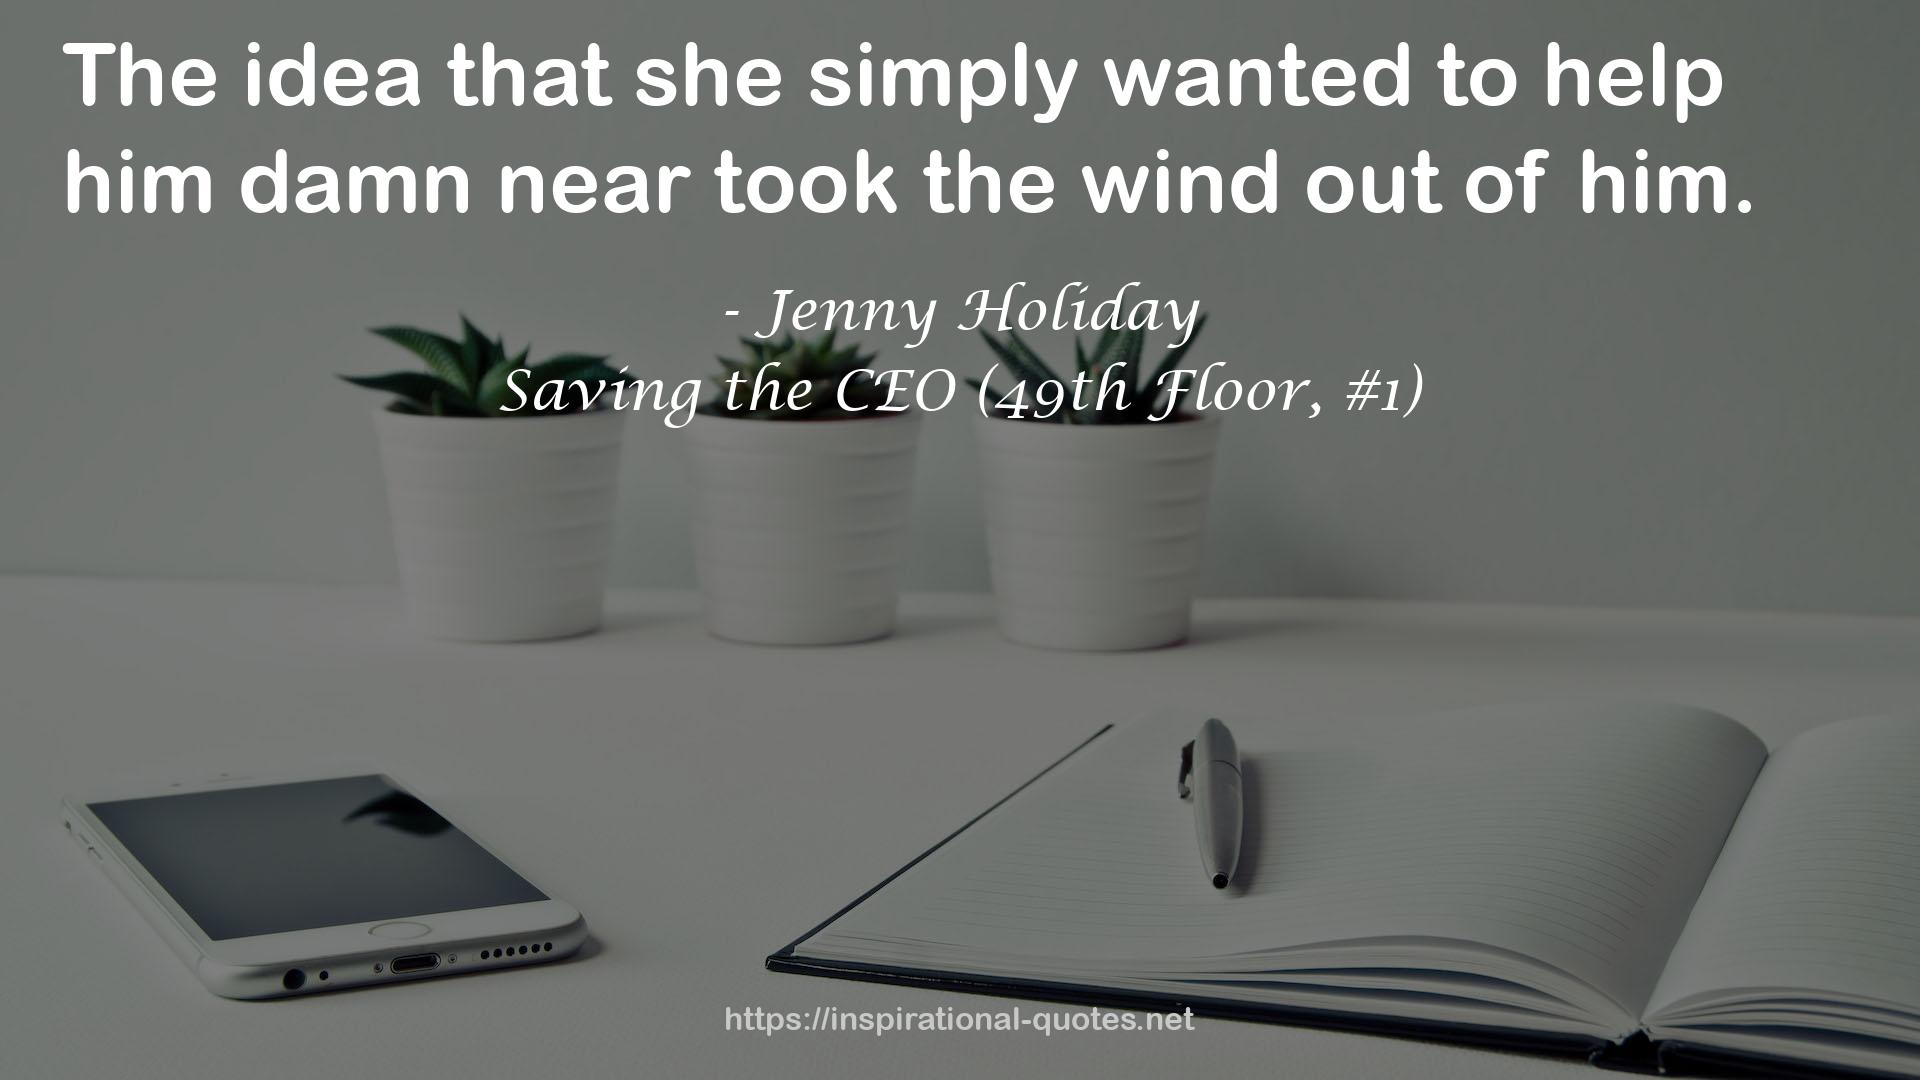 Saving the CEO (49th Floor, #1) QUOTES